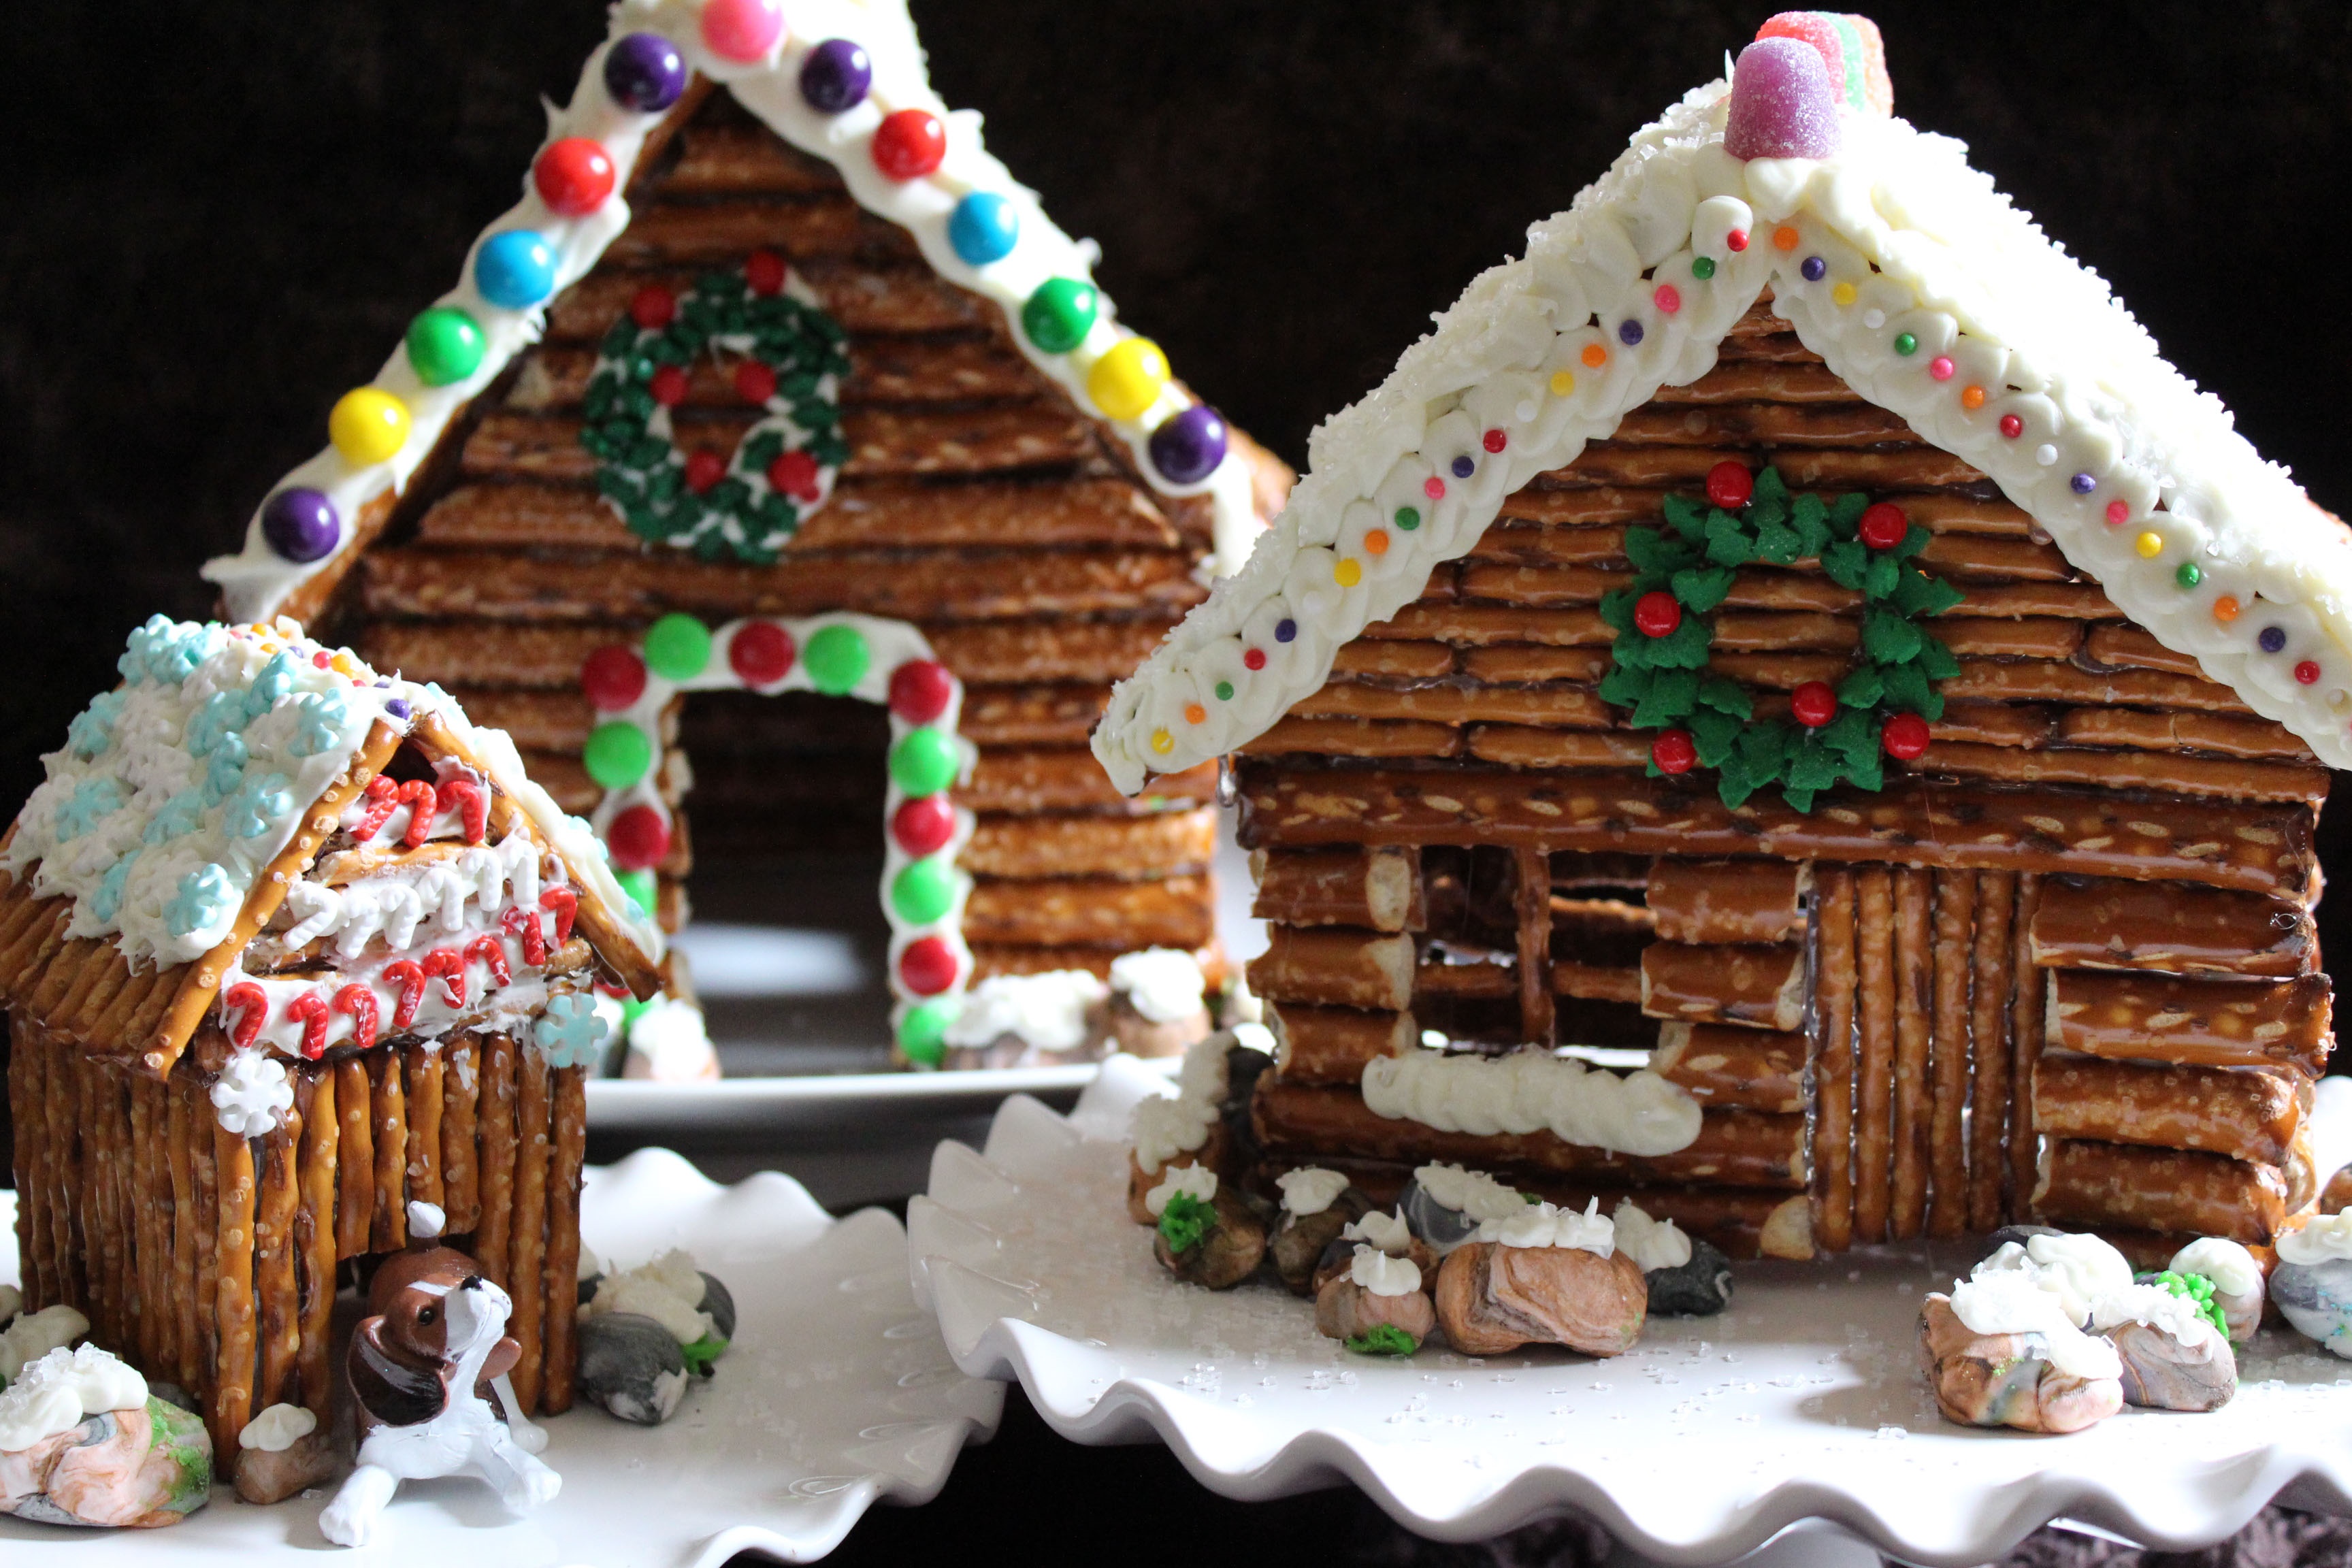 10 Awesome Gingerbread House Ideas | ParentMap